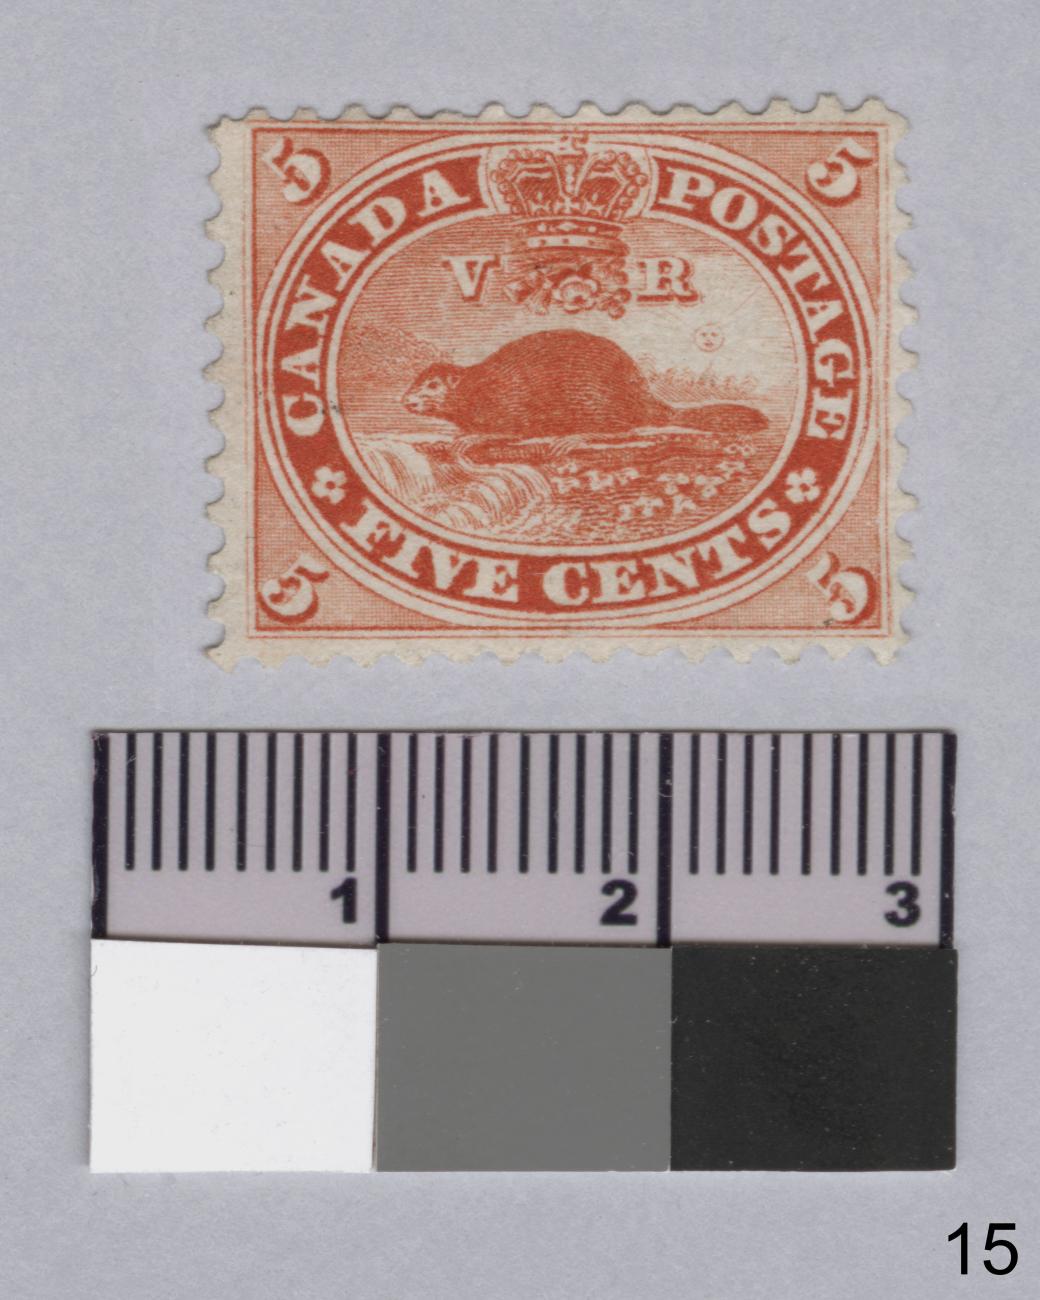 Photo of a postage stamp with a beaver picture and a ruler underneath for scale.